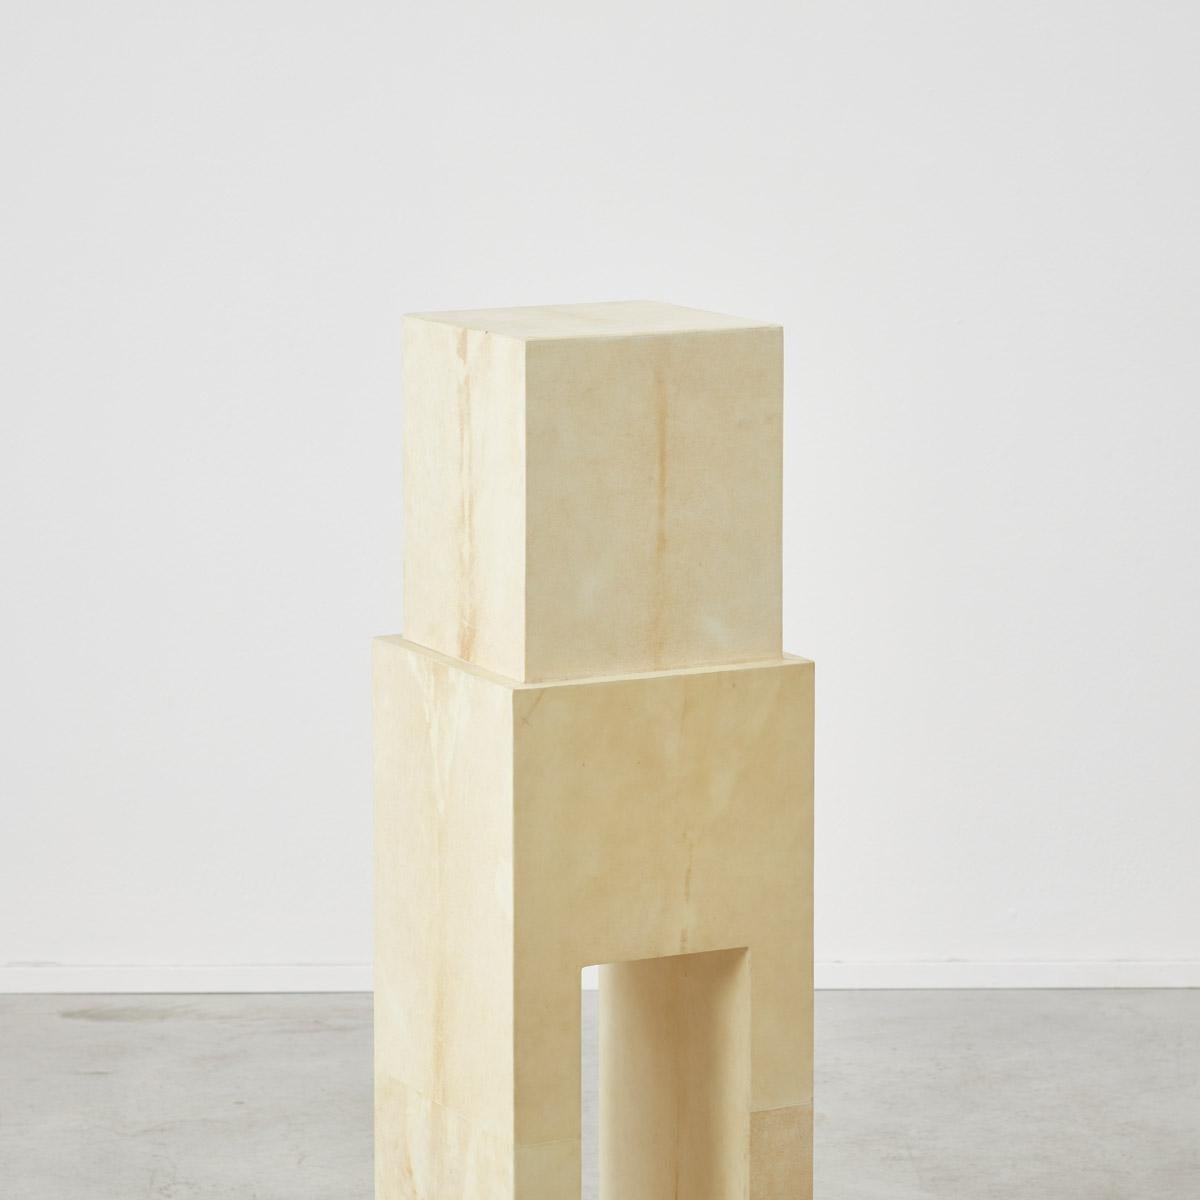 Pair Aldo Tura attr. parchment plinths, Italy 1990s In Good Condition For Sale In London, GB